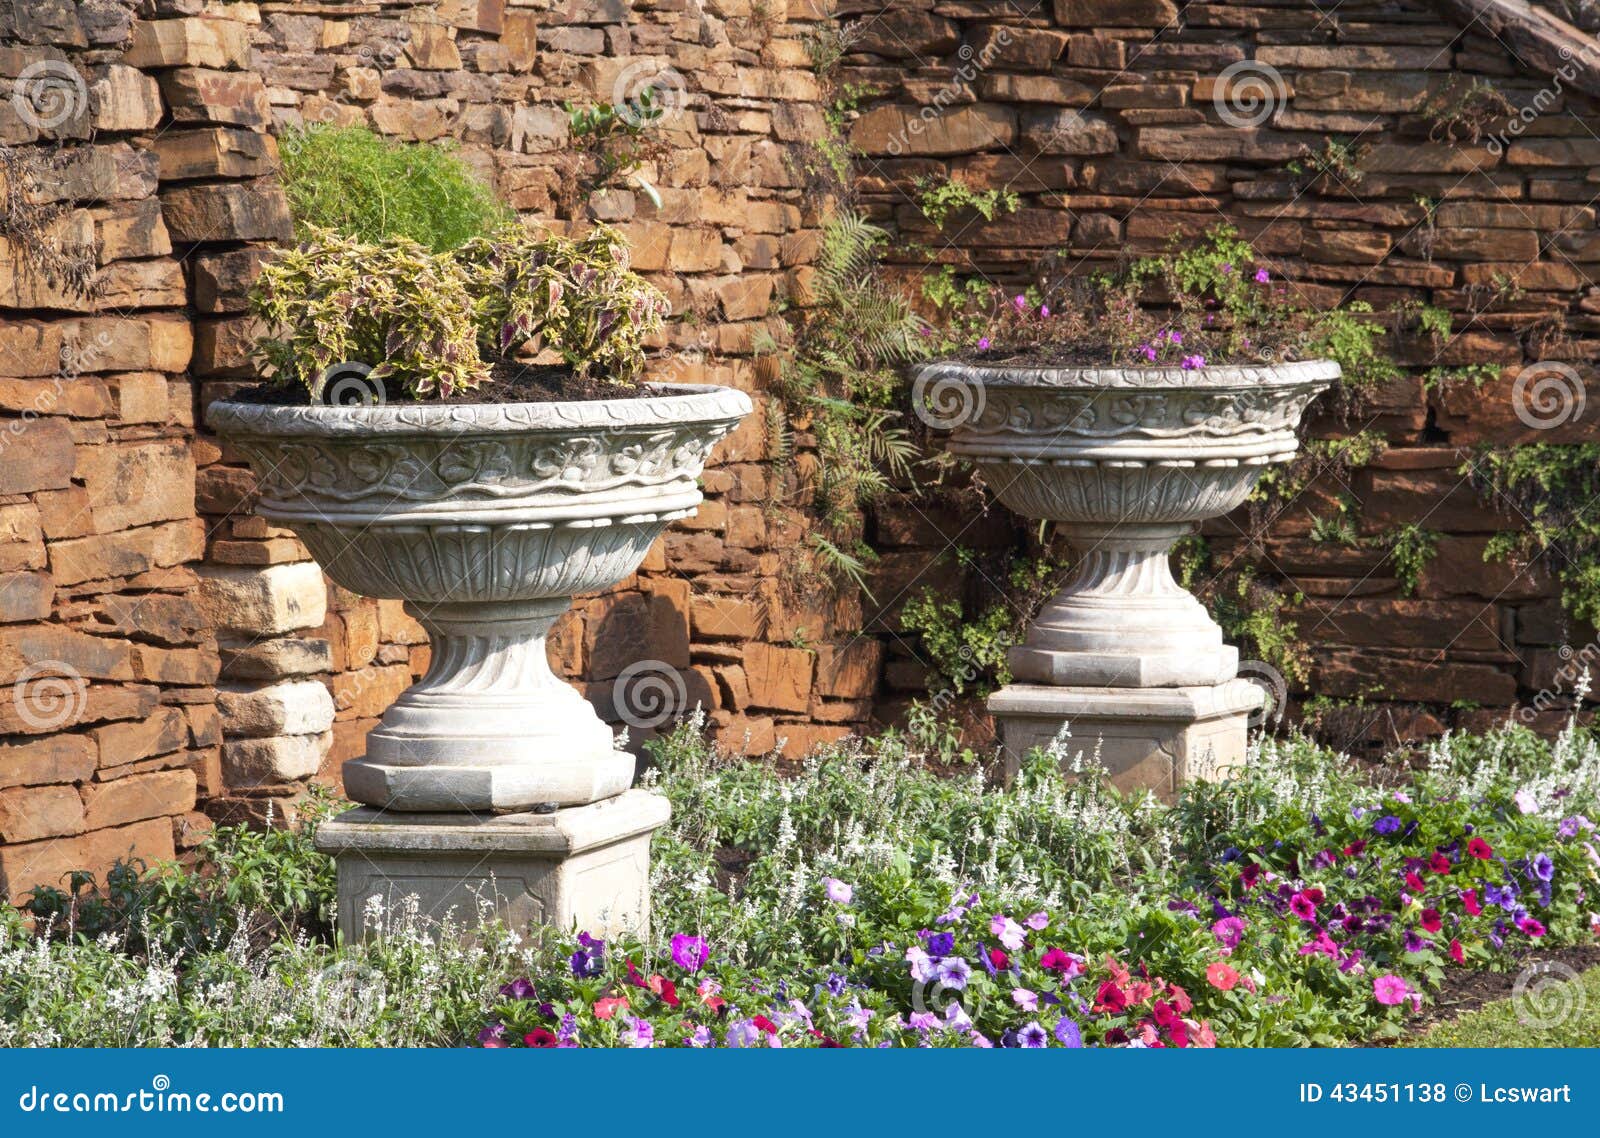 Two Urn Flower Pots In Garden Setting Stock Photo Image Of Summer Detail 43451138